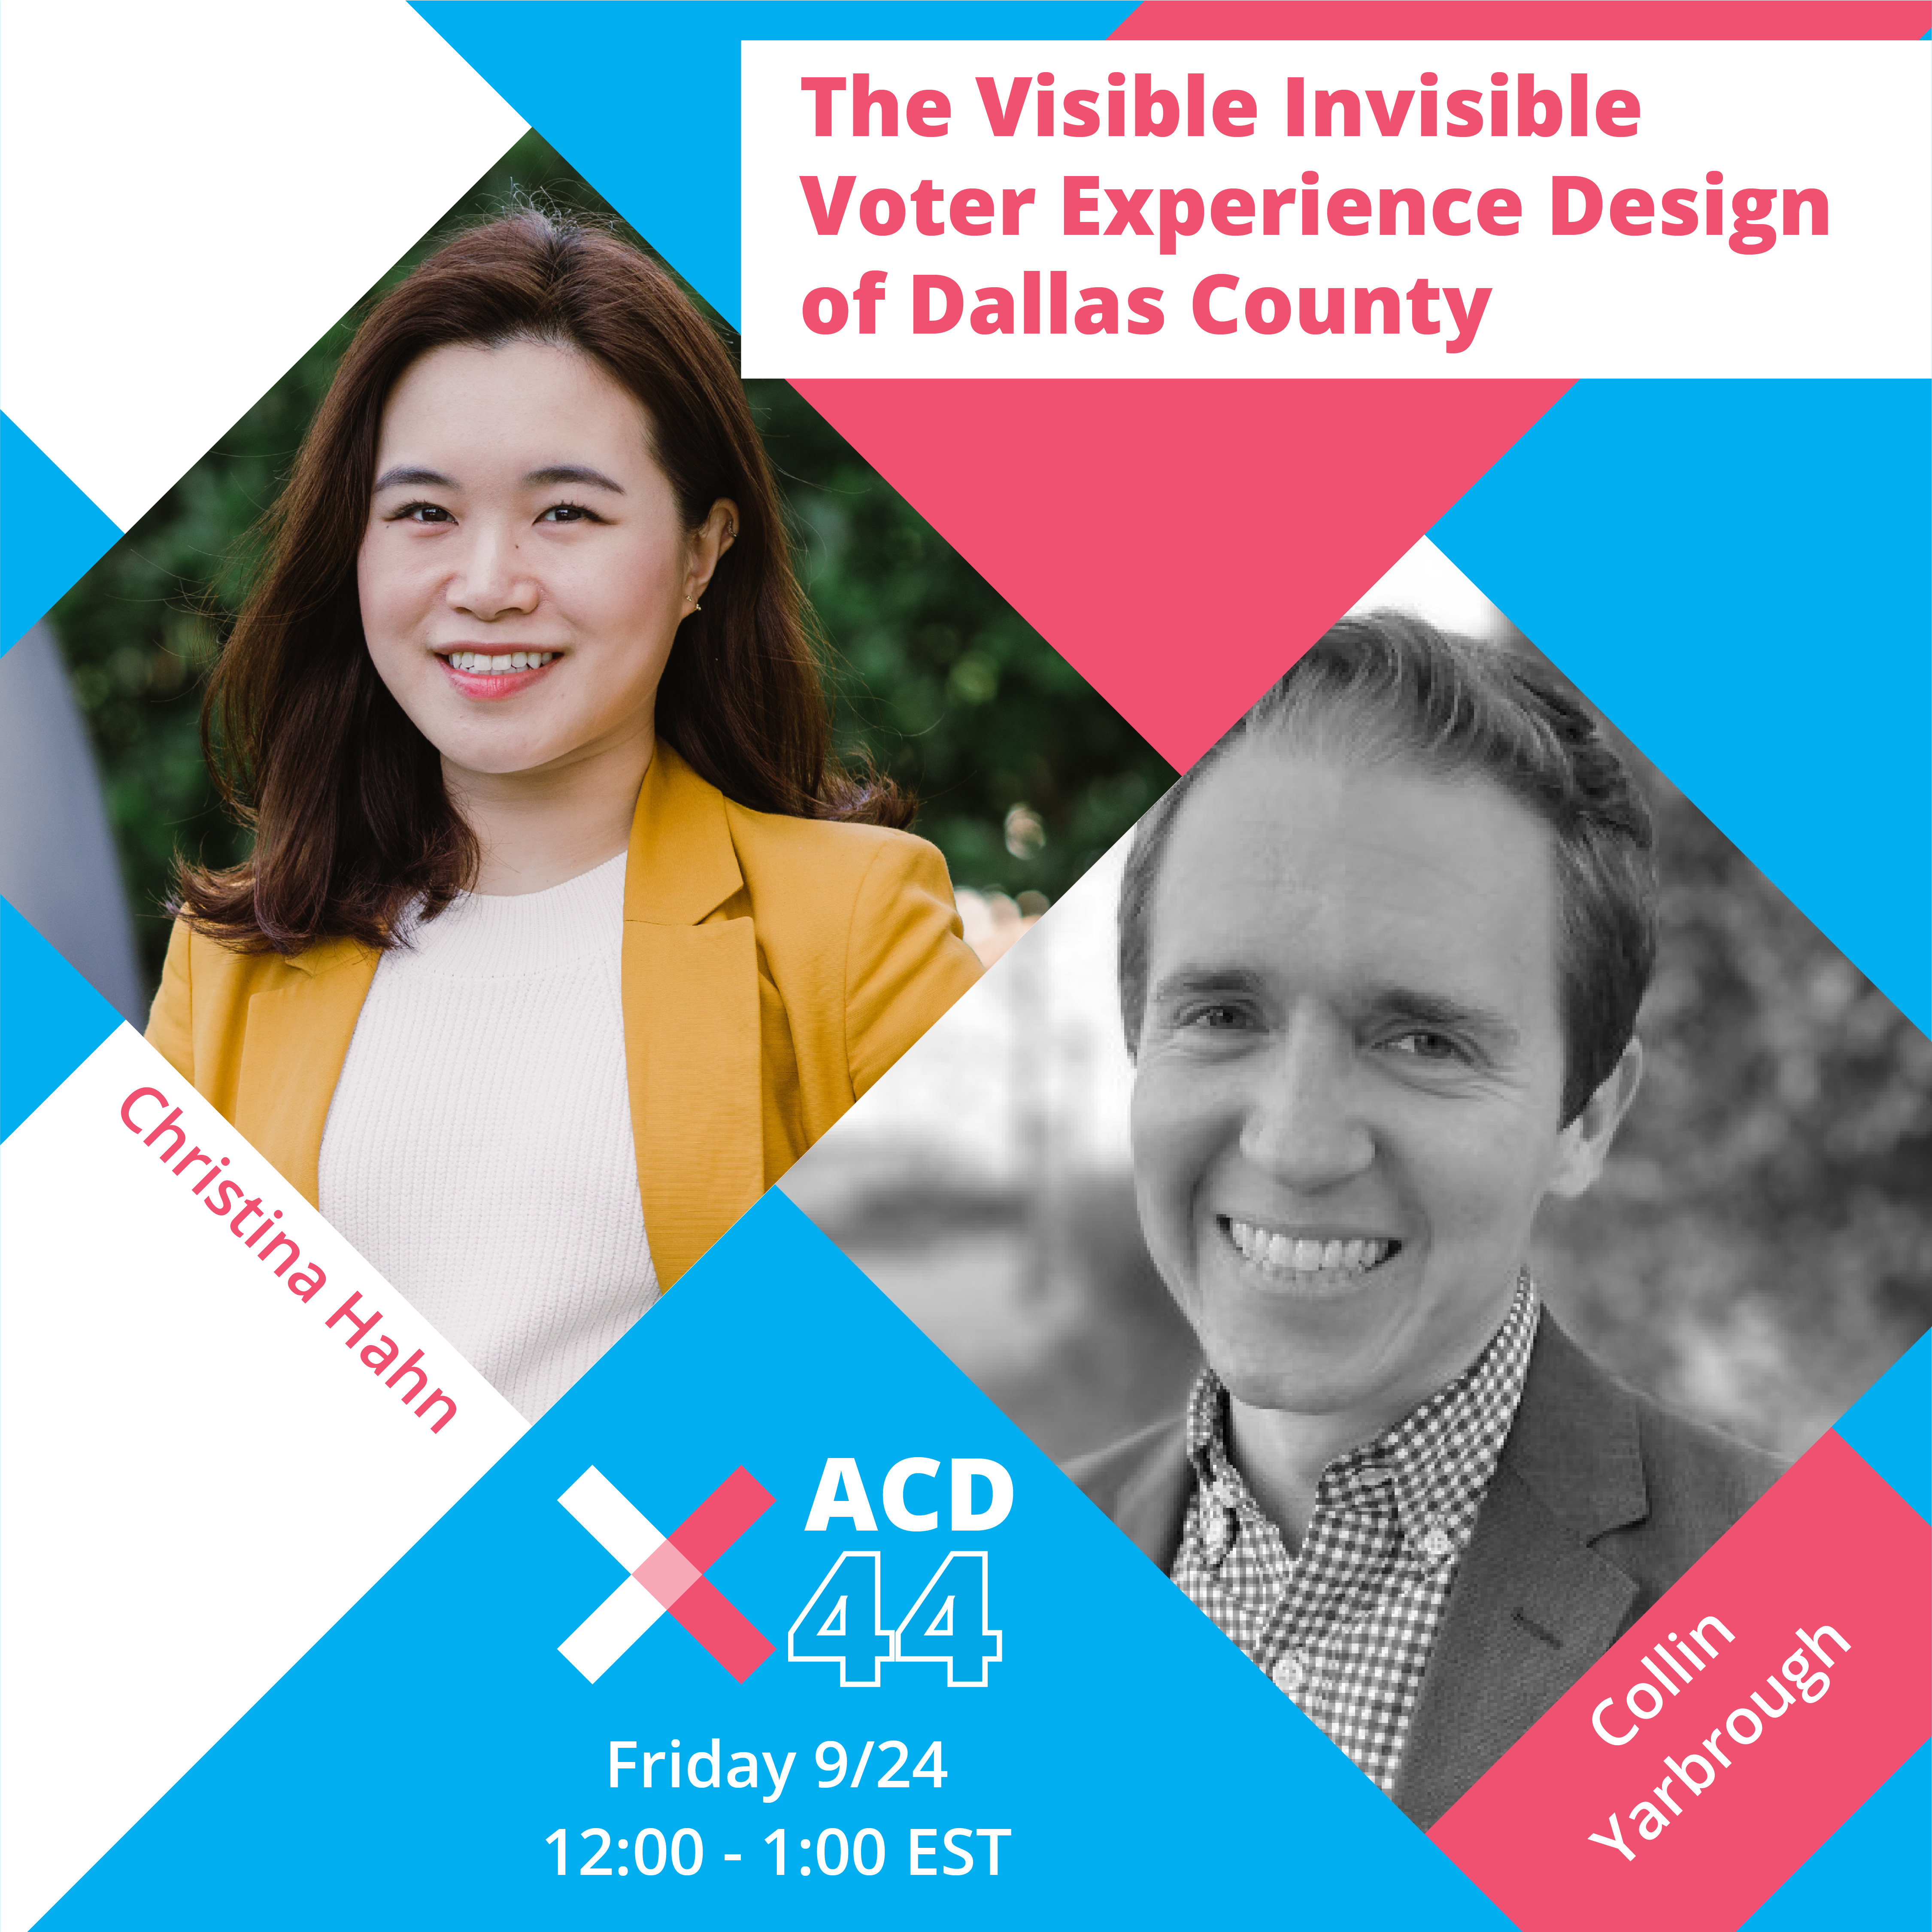 ACD2021: The Visible Invisible Voter Experience Design of Dallas County